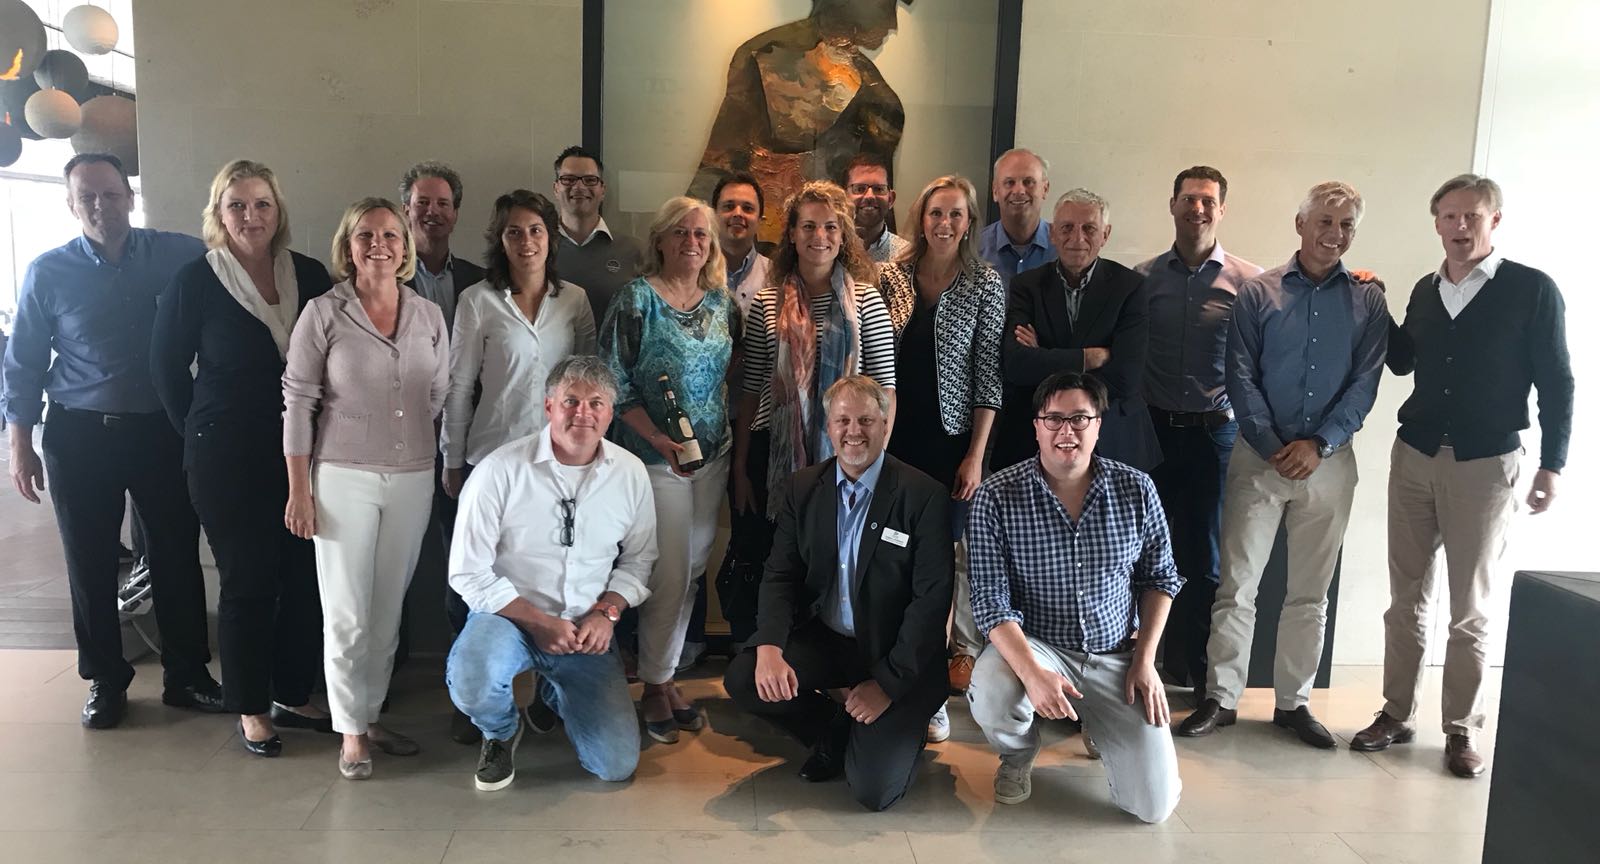 Pictured – the delegates at the taster session in Amsterdam, with Lodewijk Klootwijk and Torbjorn Johansson